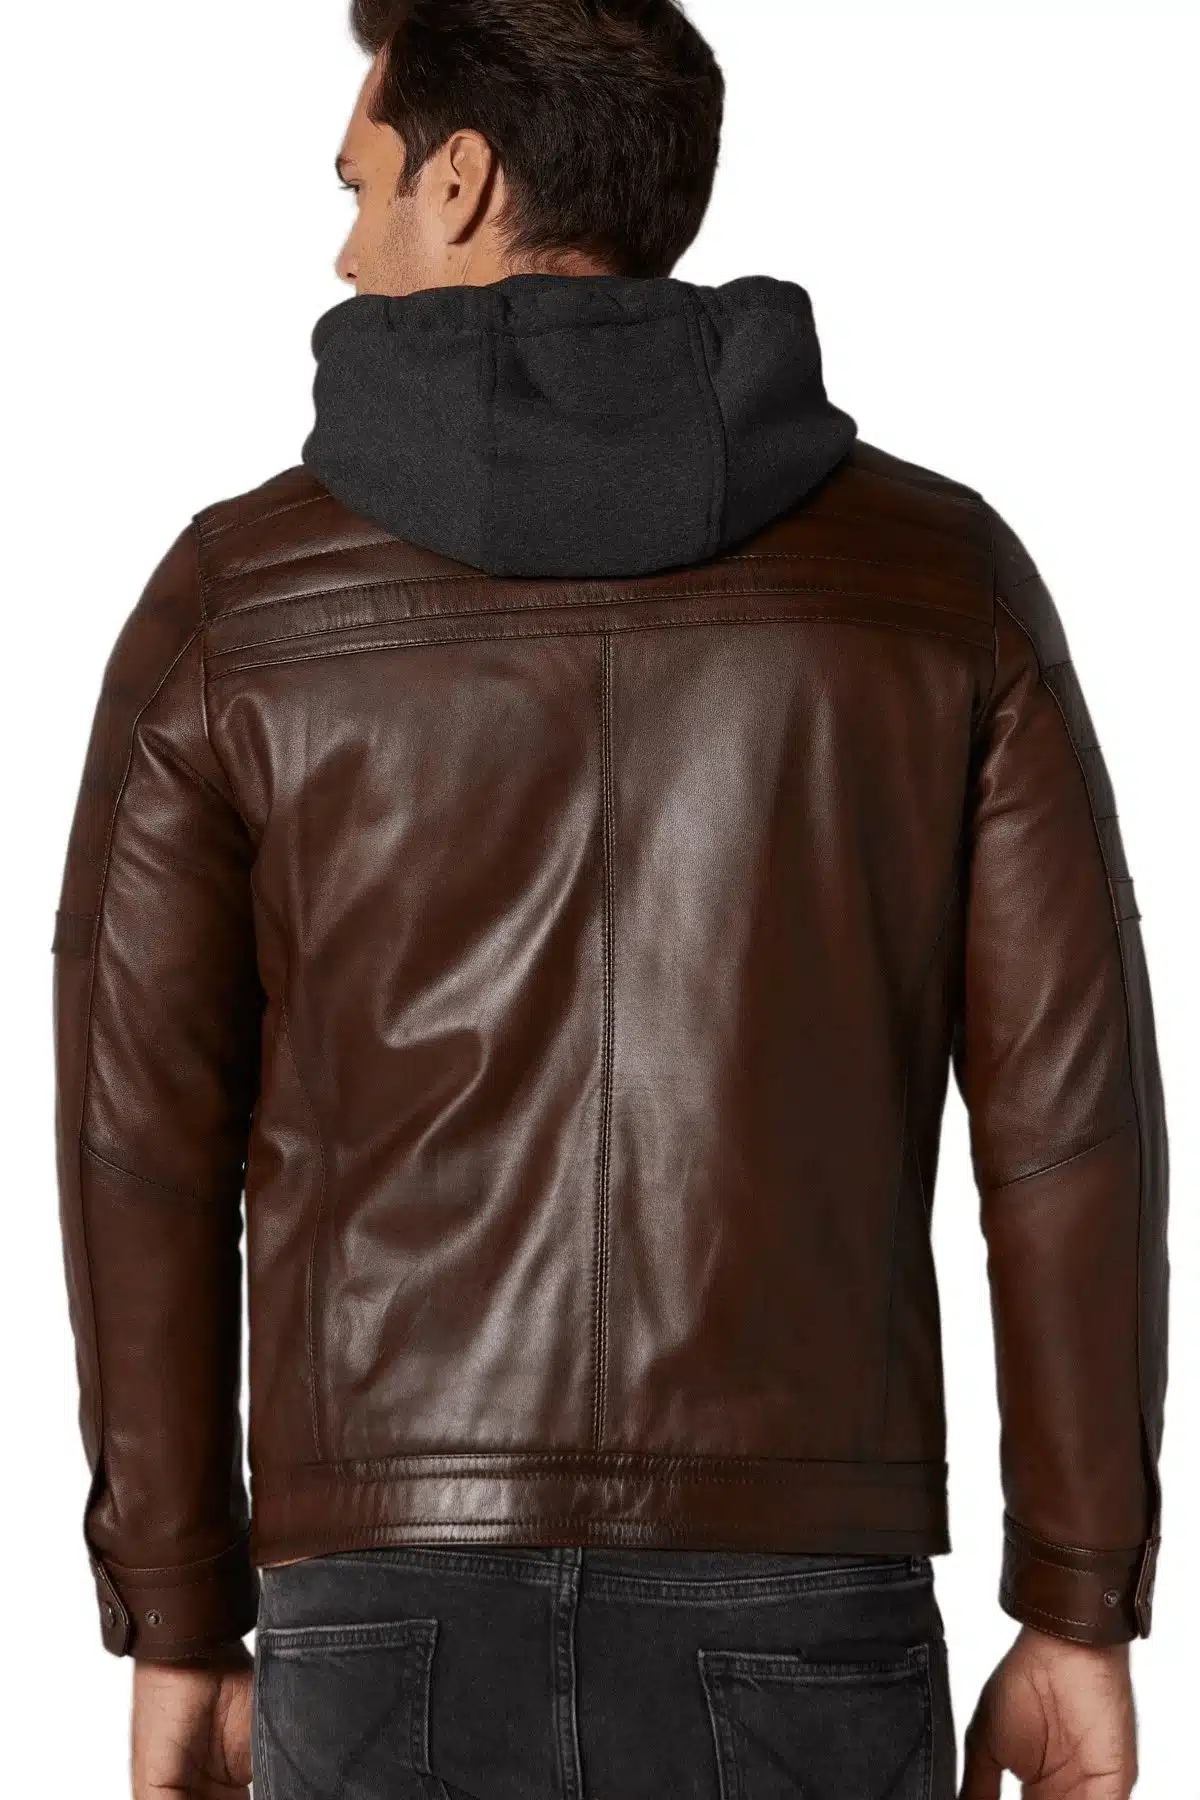 Hooded Classic Brown Men’s Leather Jacket (2)_result